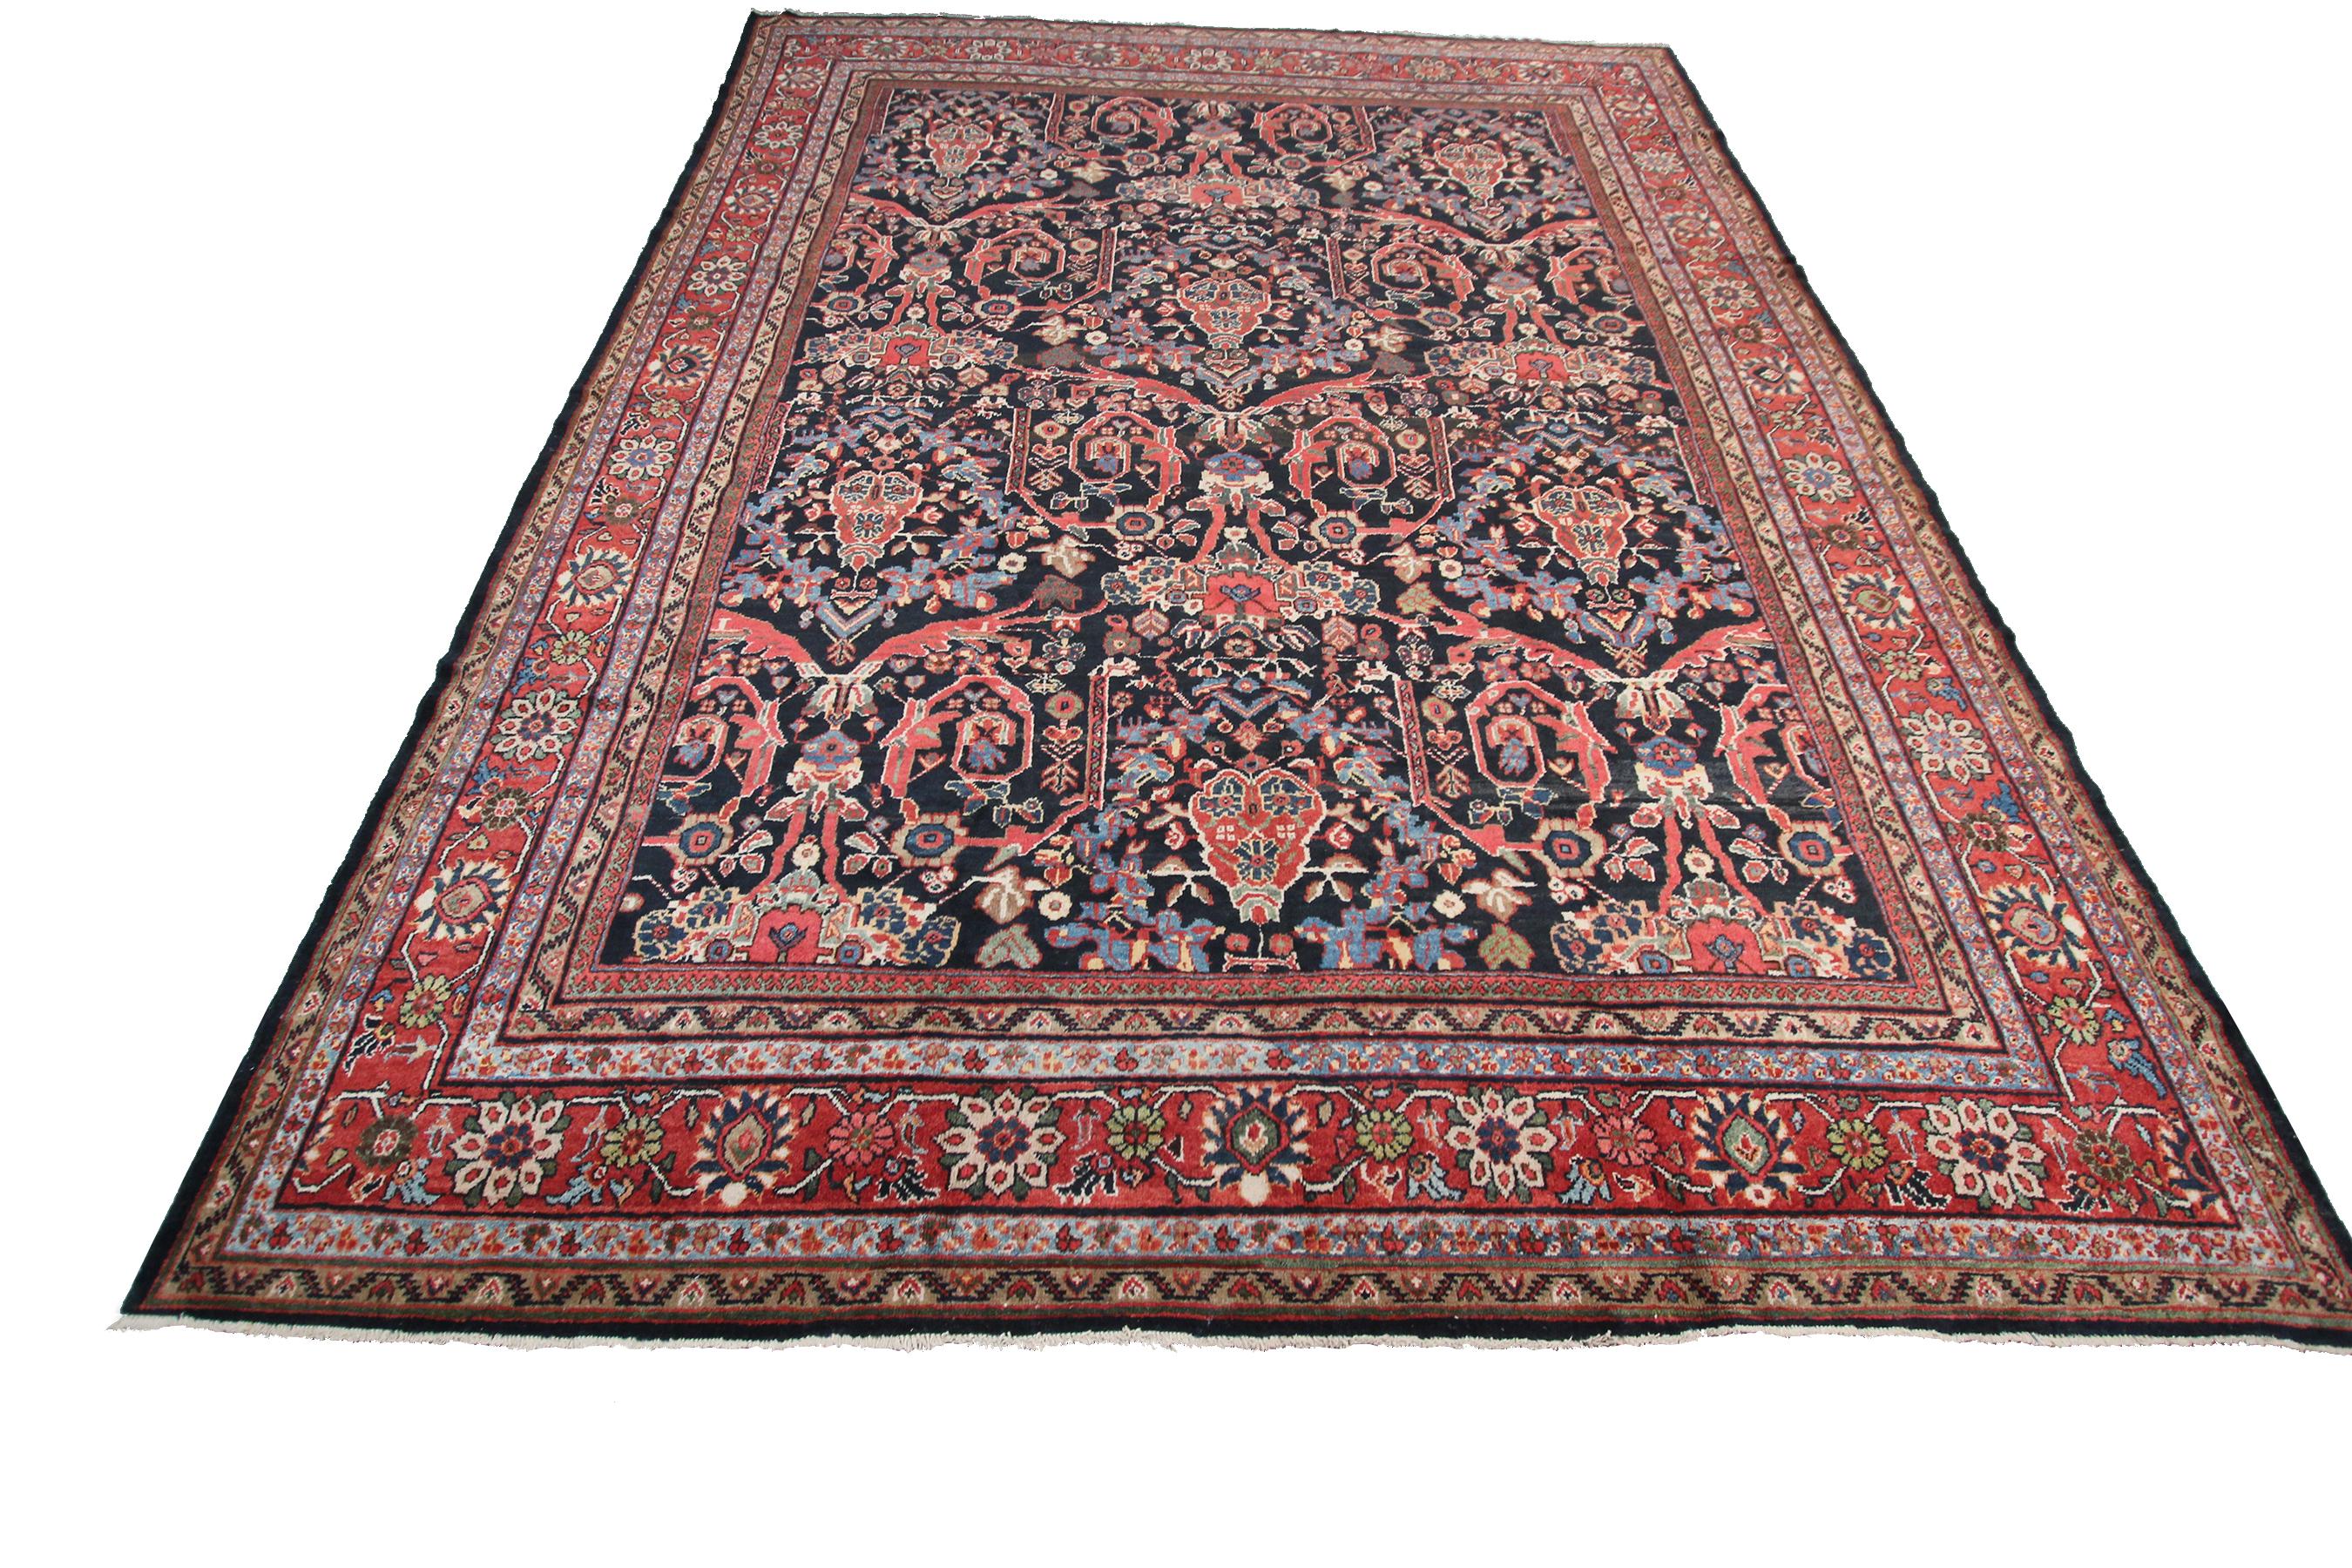 Early 20th Century Antique Persian Mahal Rug Antique Sultanabad Rug Blue Geometric Overall For Sale